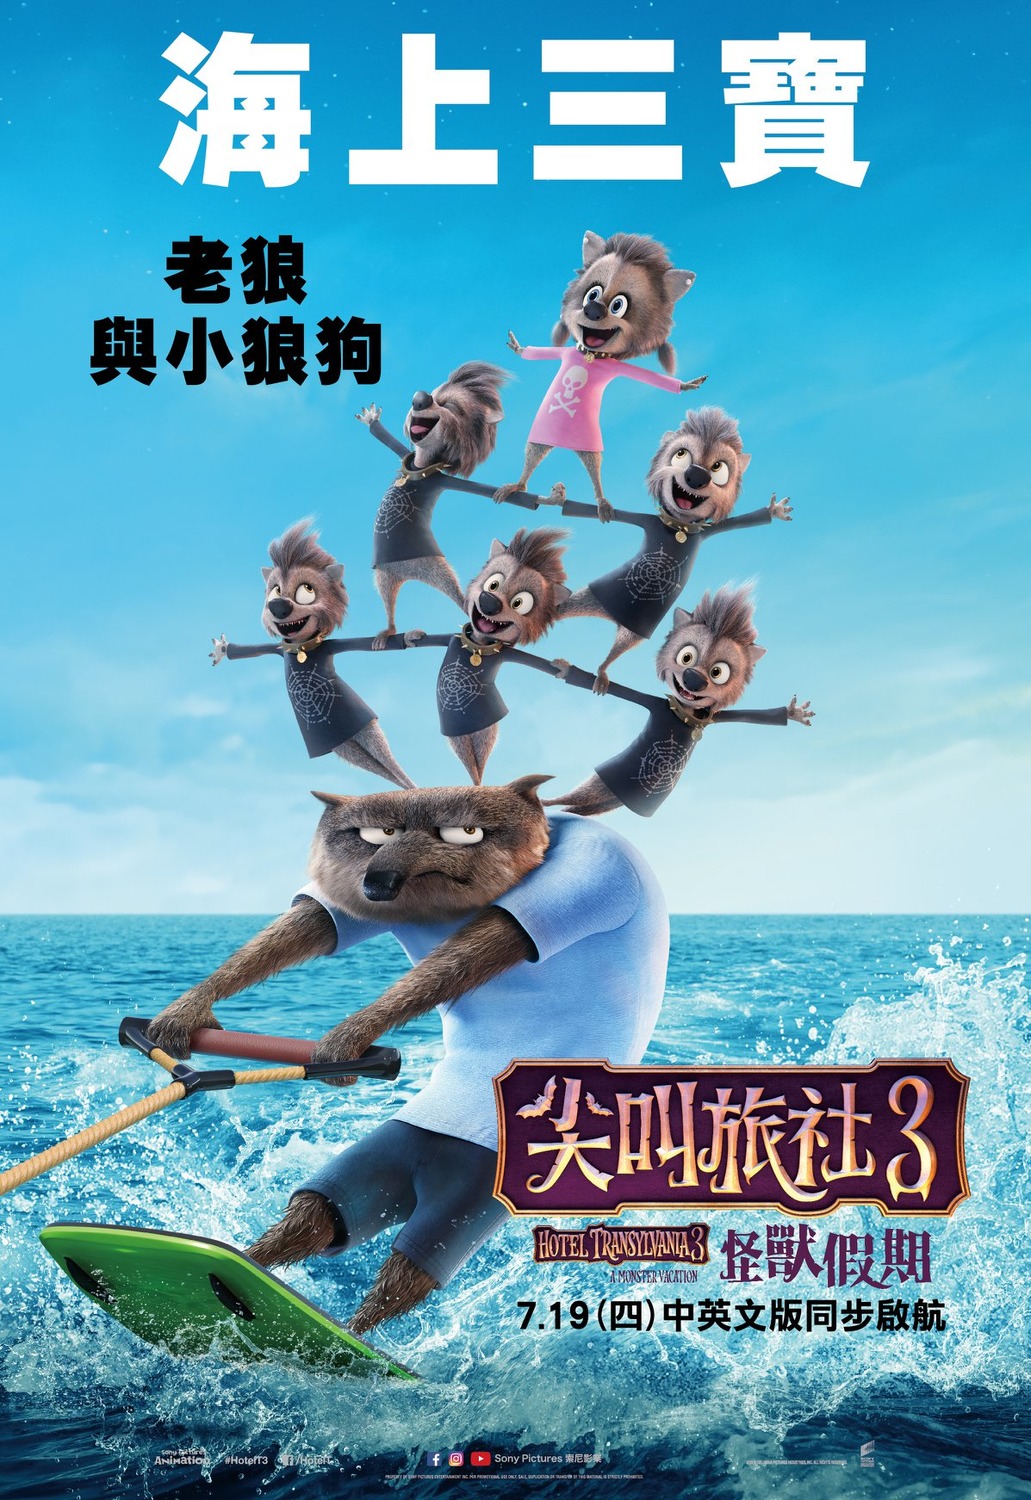 Extra Large Movie Poster Image for Hotel Transylvania 3: Summer Vacation (#15 of 17)